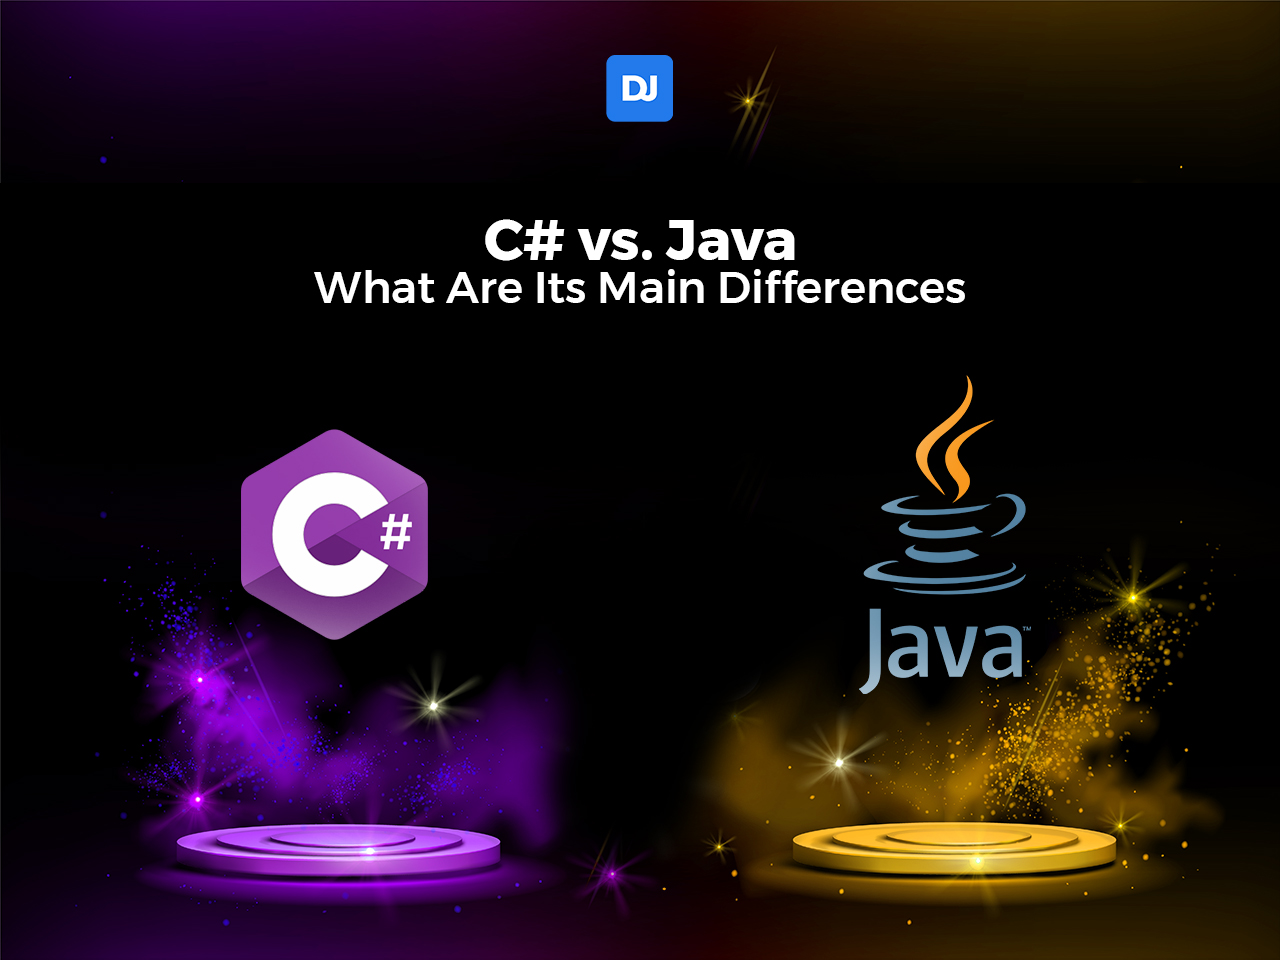 Why do companies choose Java over C#?